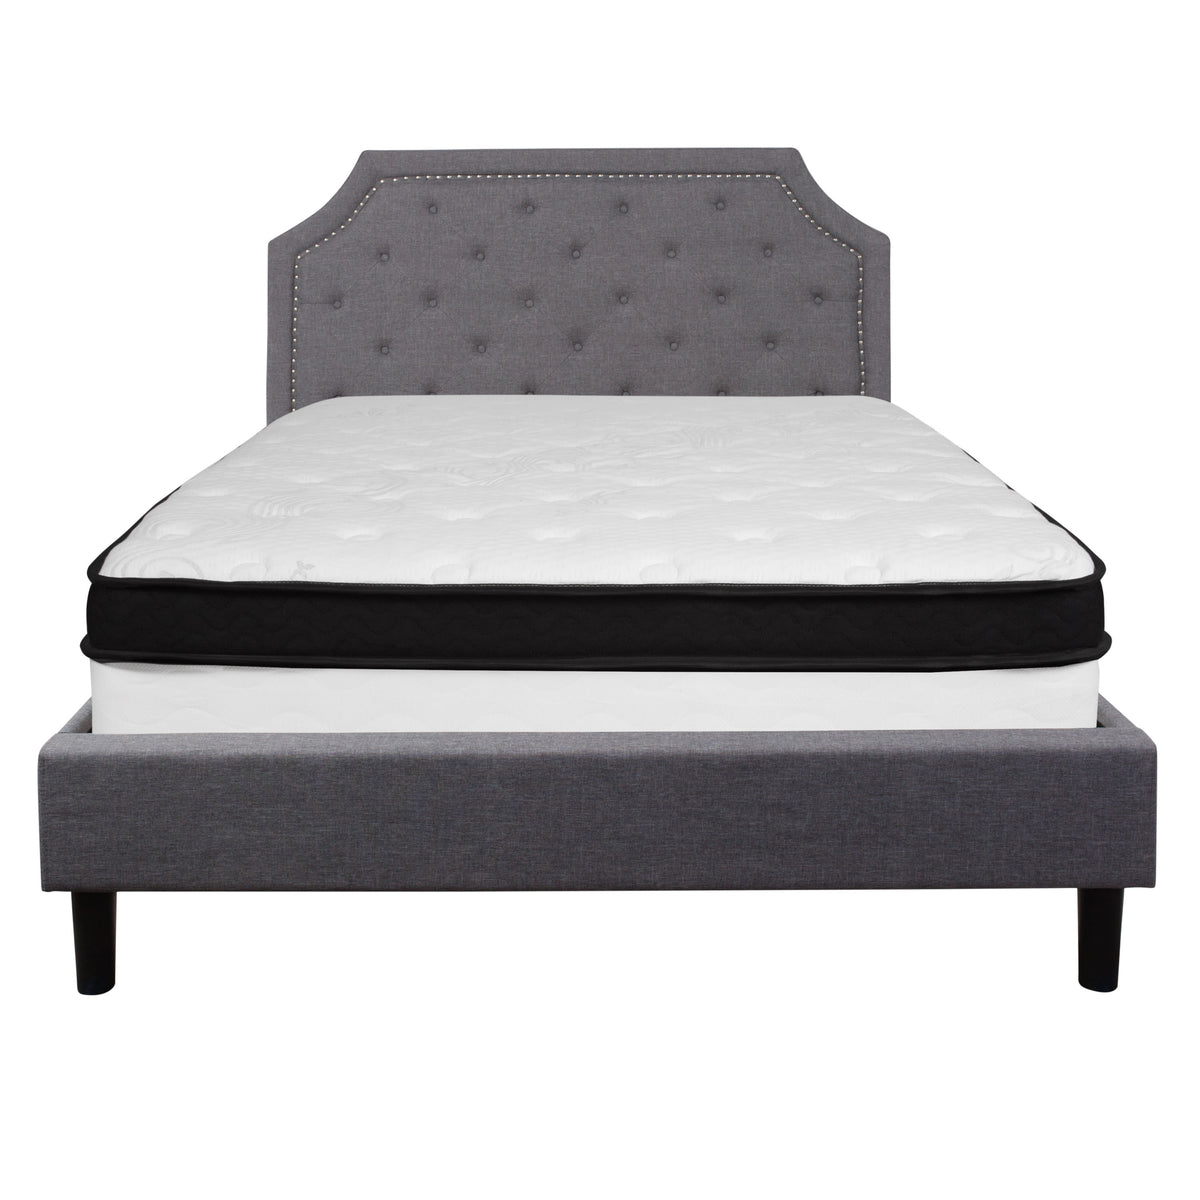 Light Gray,Queen |#| Queen Size Arched Tufted Lt Gray Fabric Platform Bed with Memory Foam Mattress